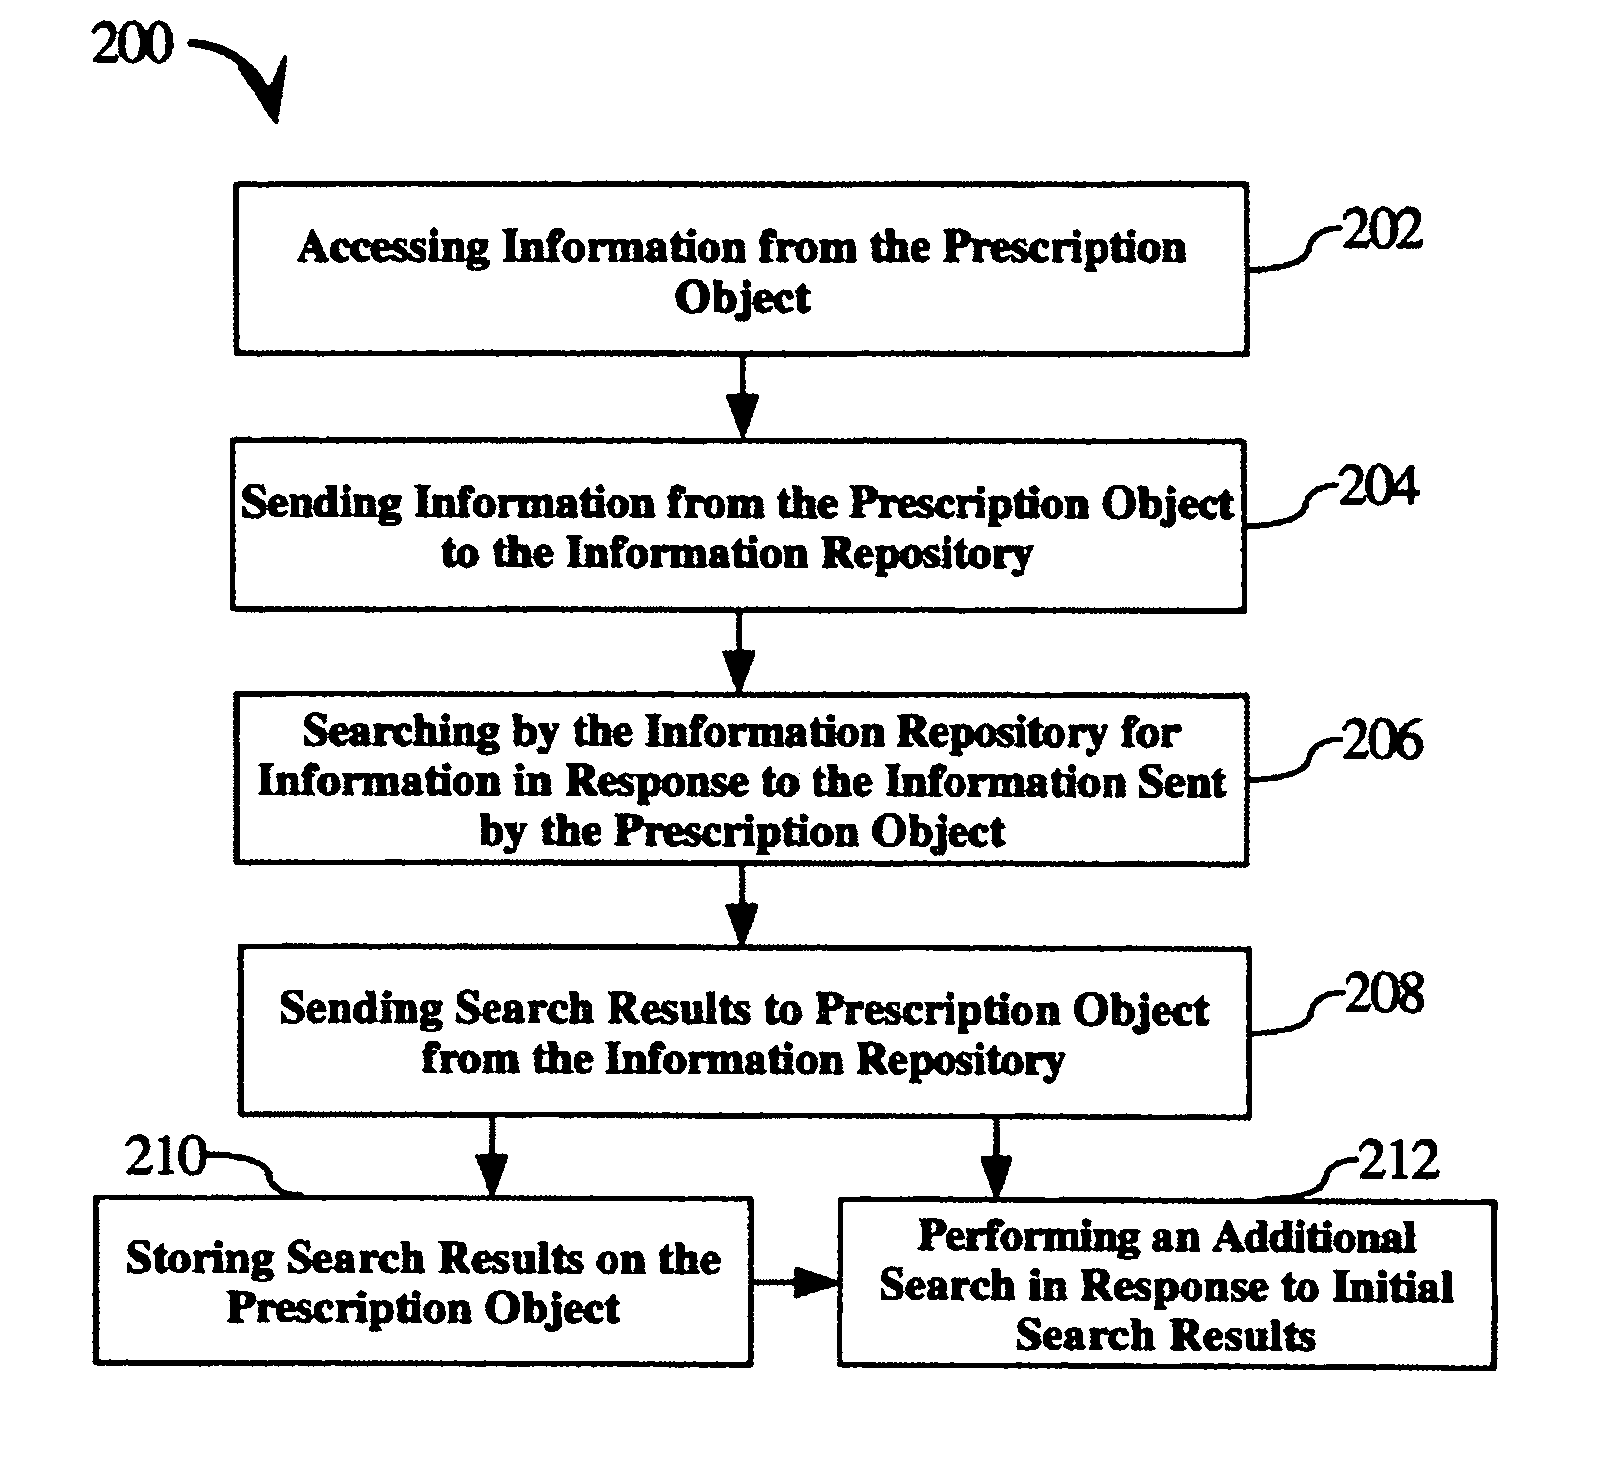 Application of an electronic prescription object to food preparation